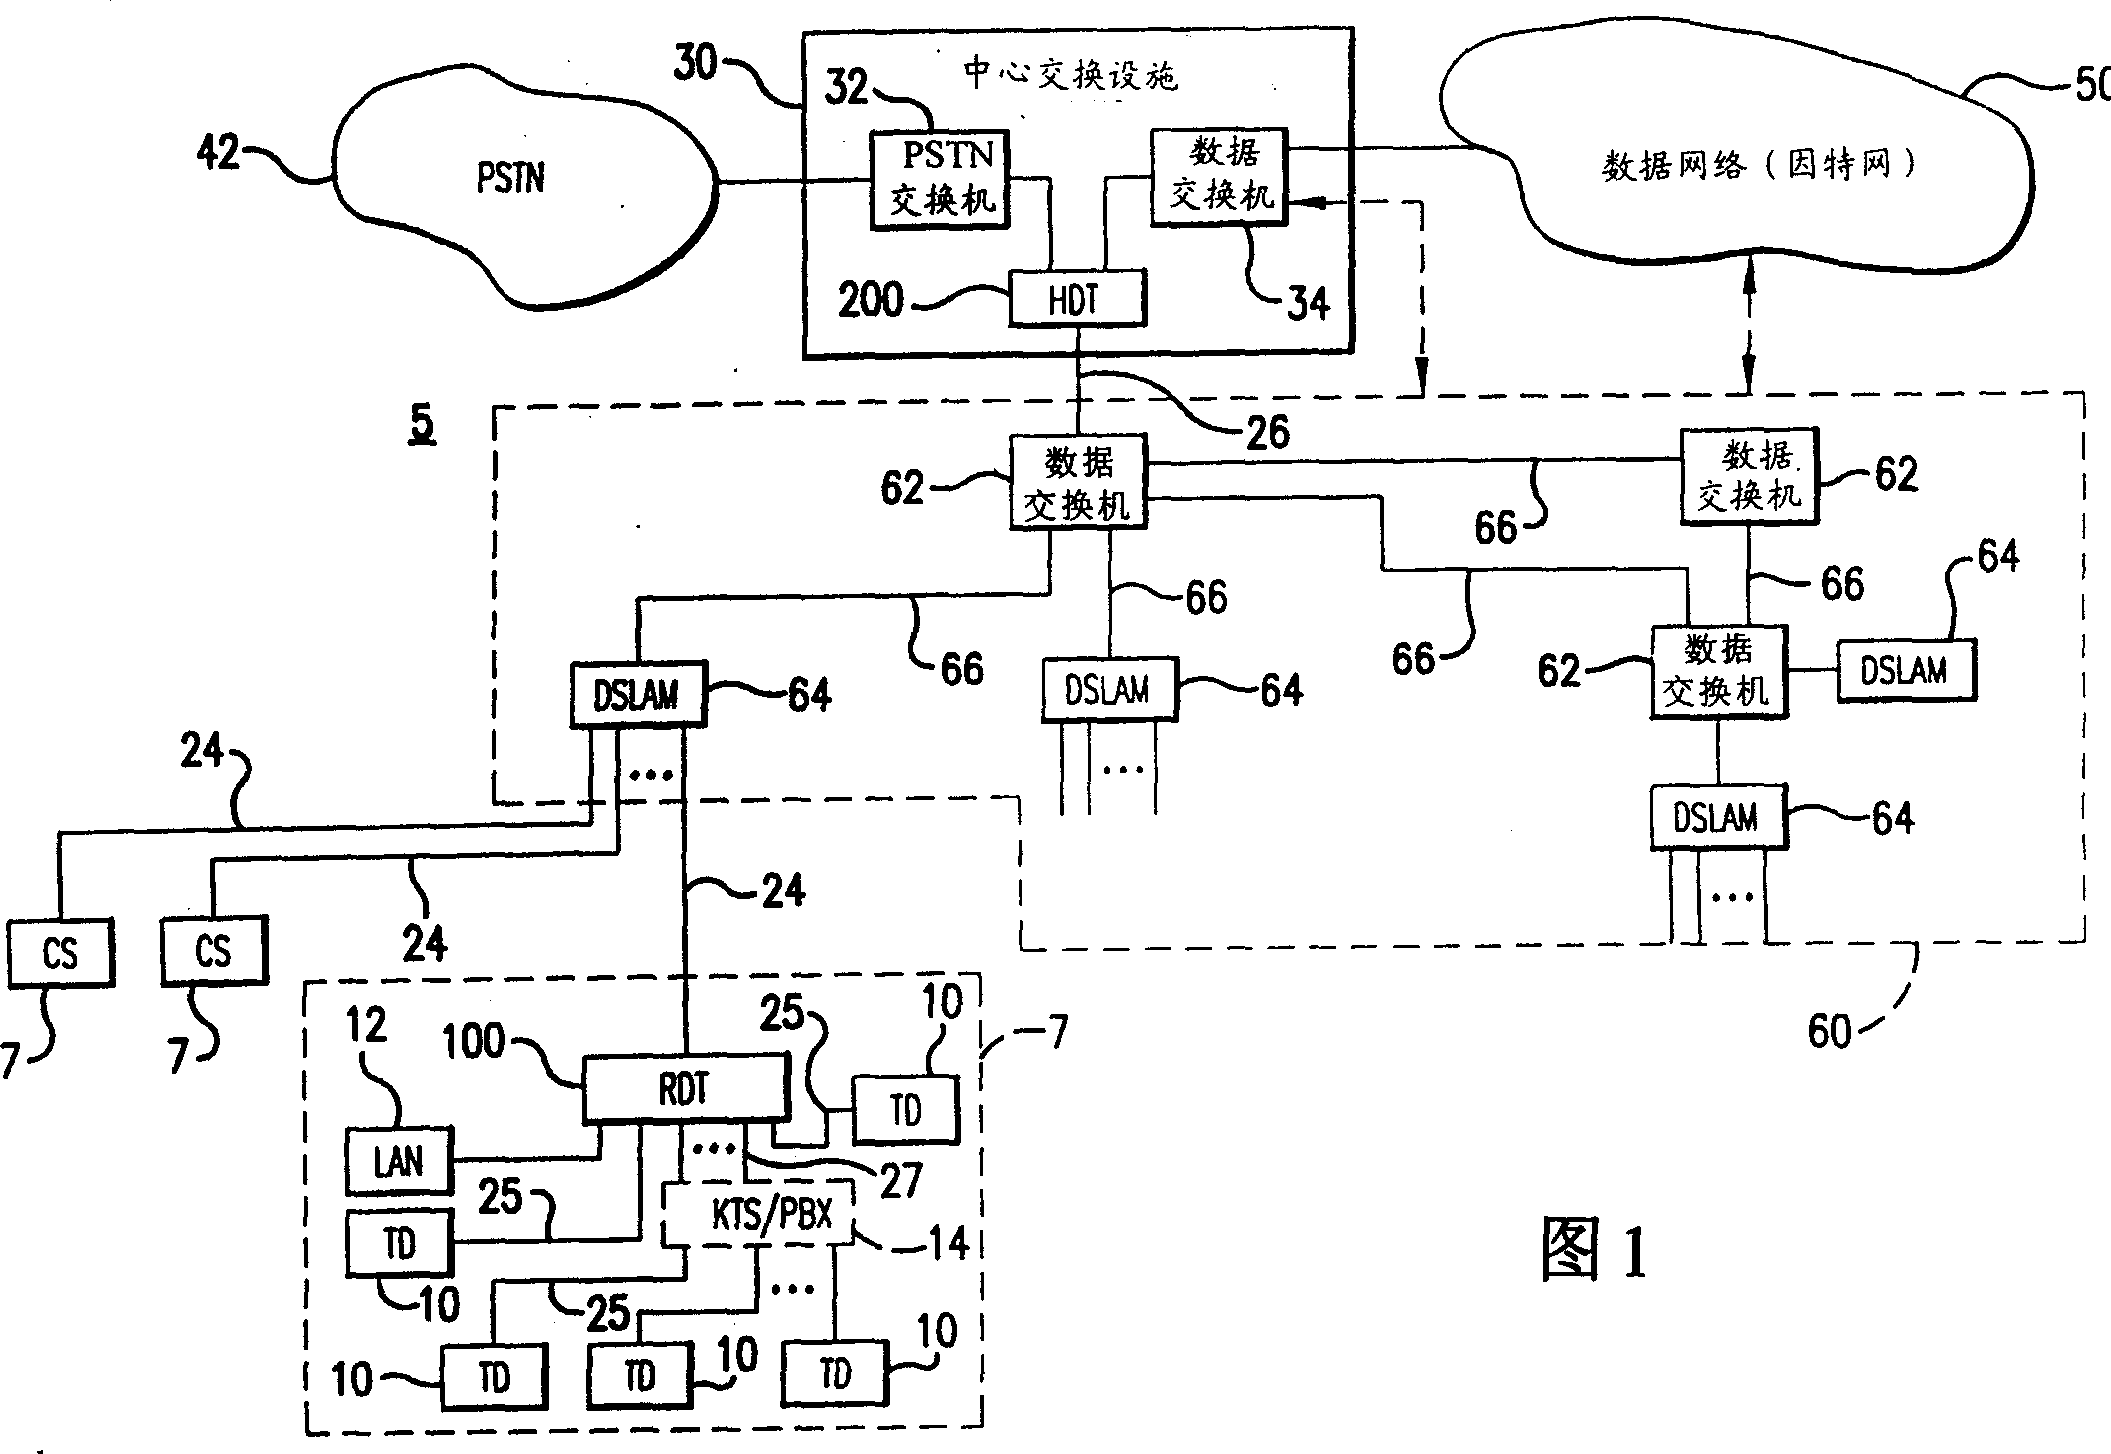 System and method for communicating voice and data cover local packet network